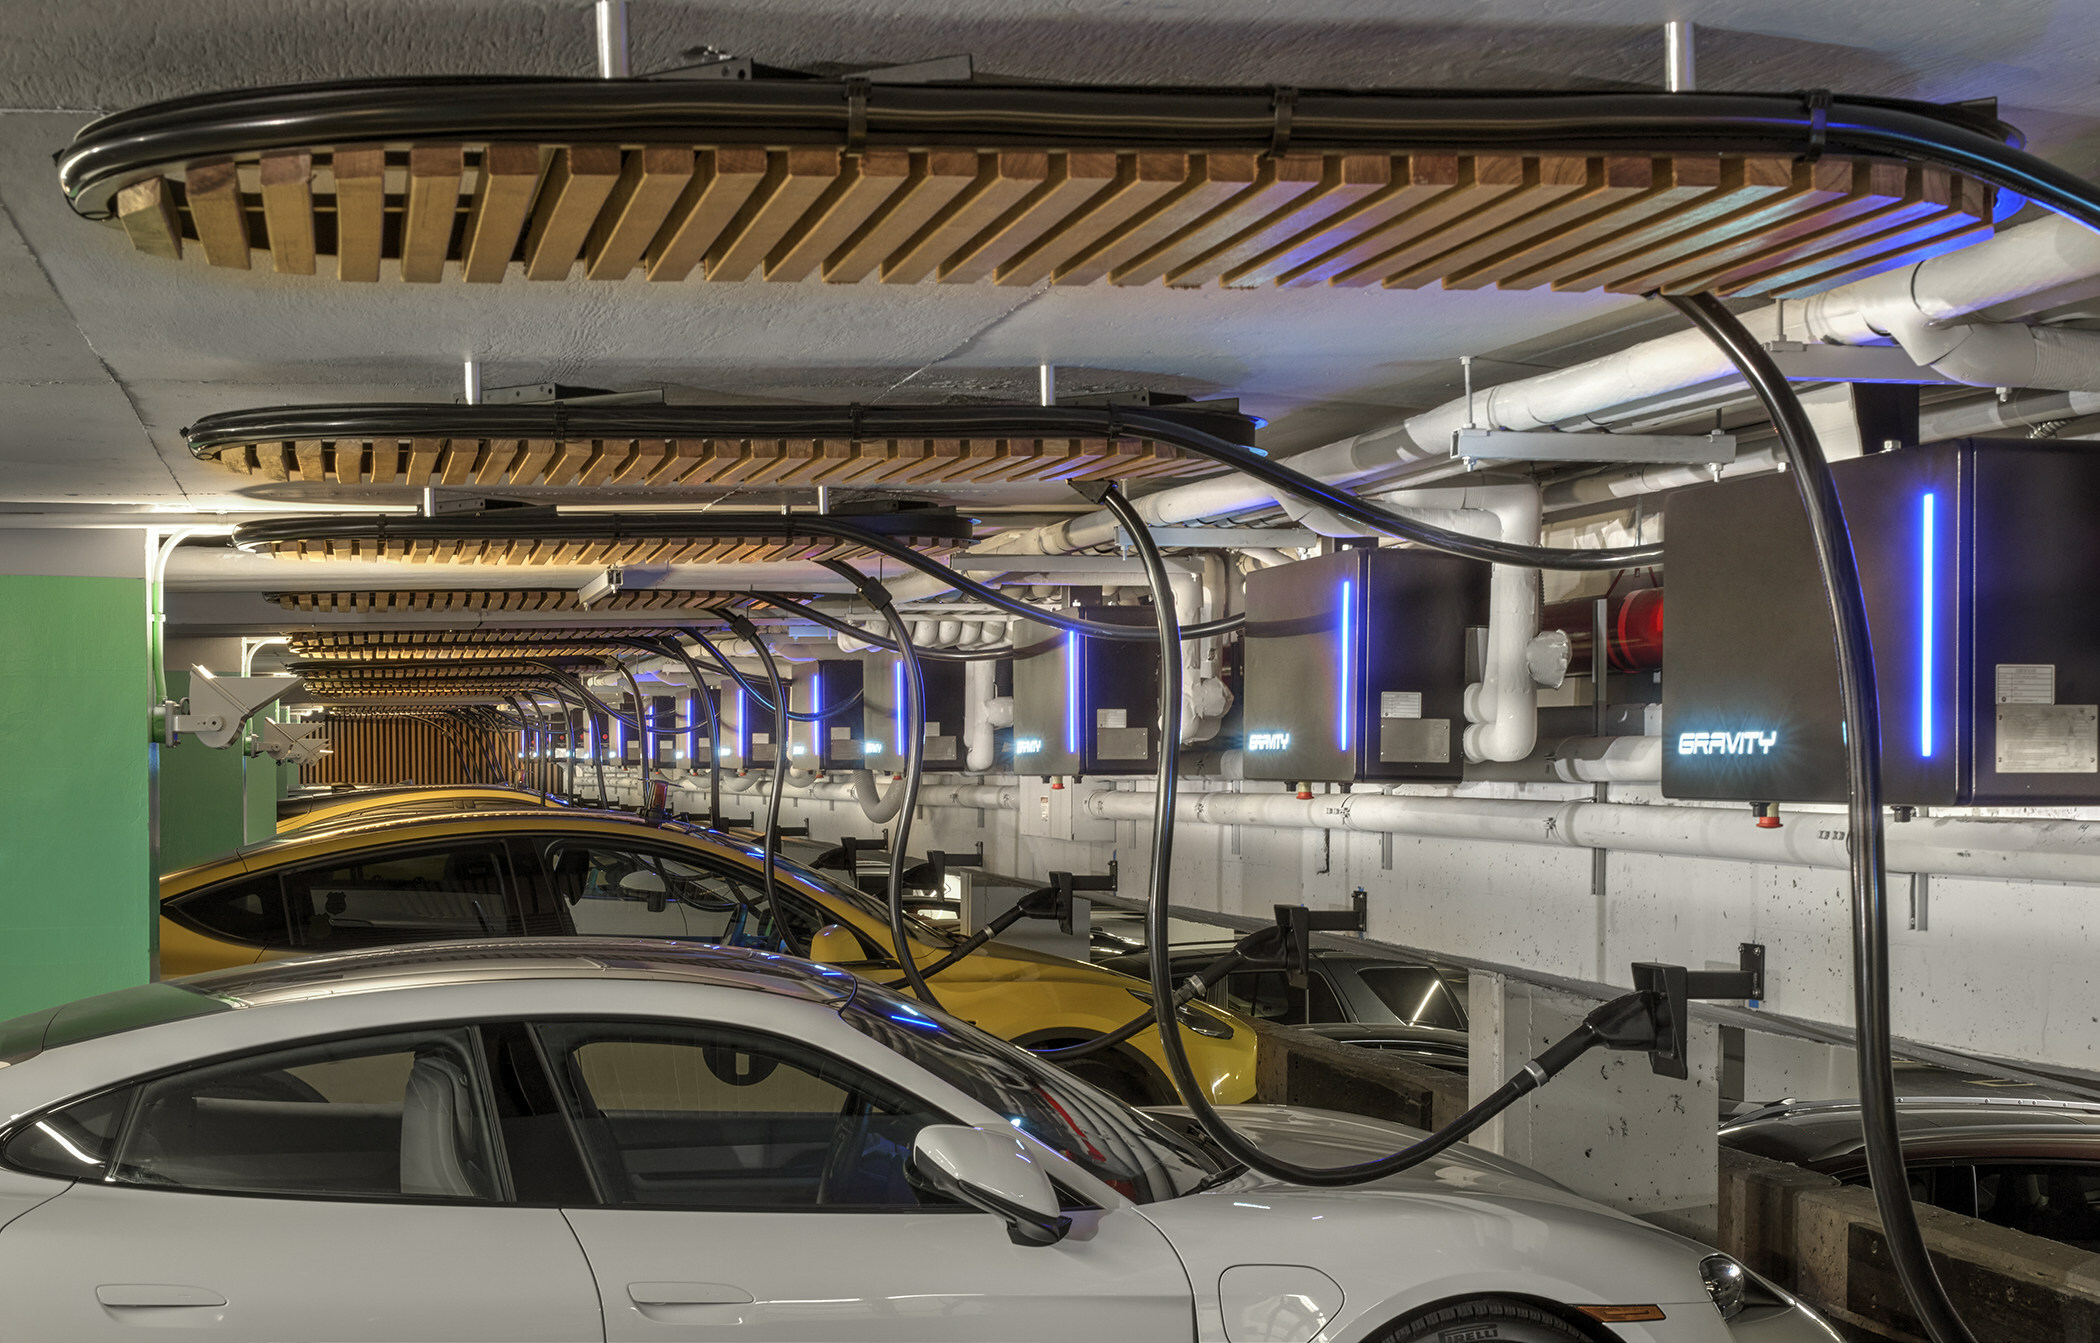 Gravity says its chargers are 90-times faster than comparably-sized Level 2 chargers deployed in most garages. Image: Gravity